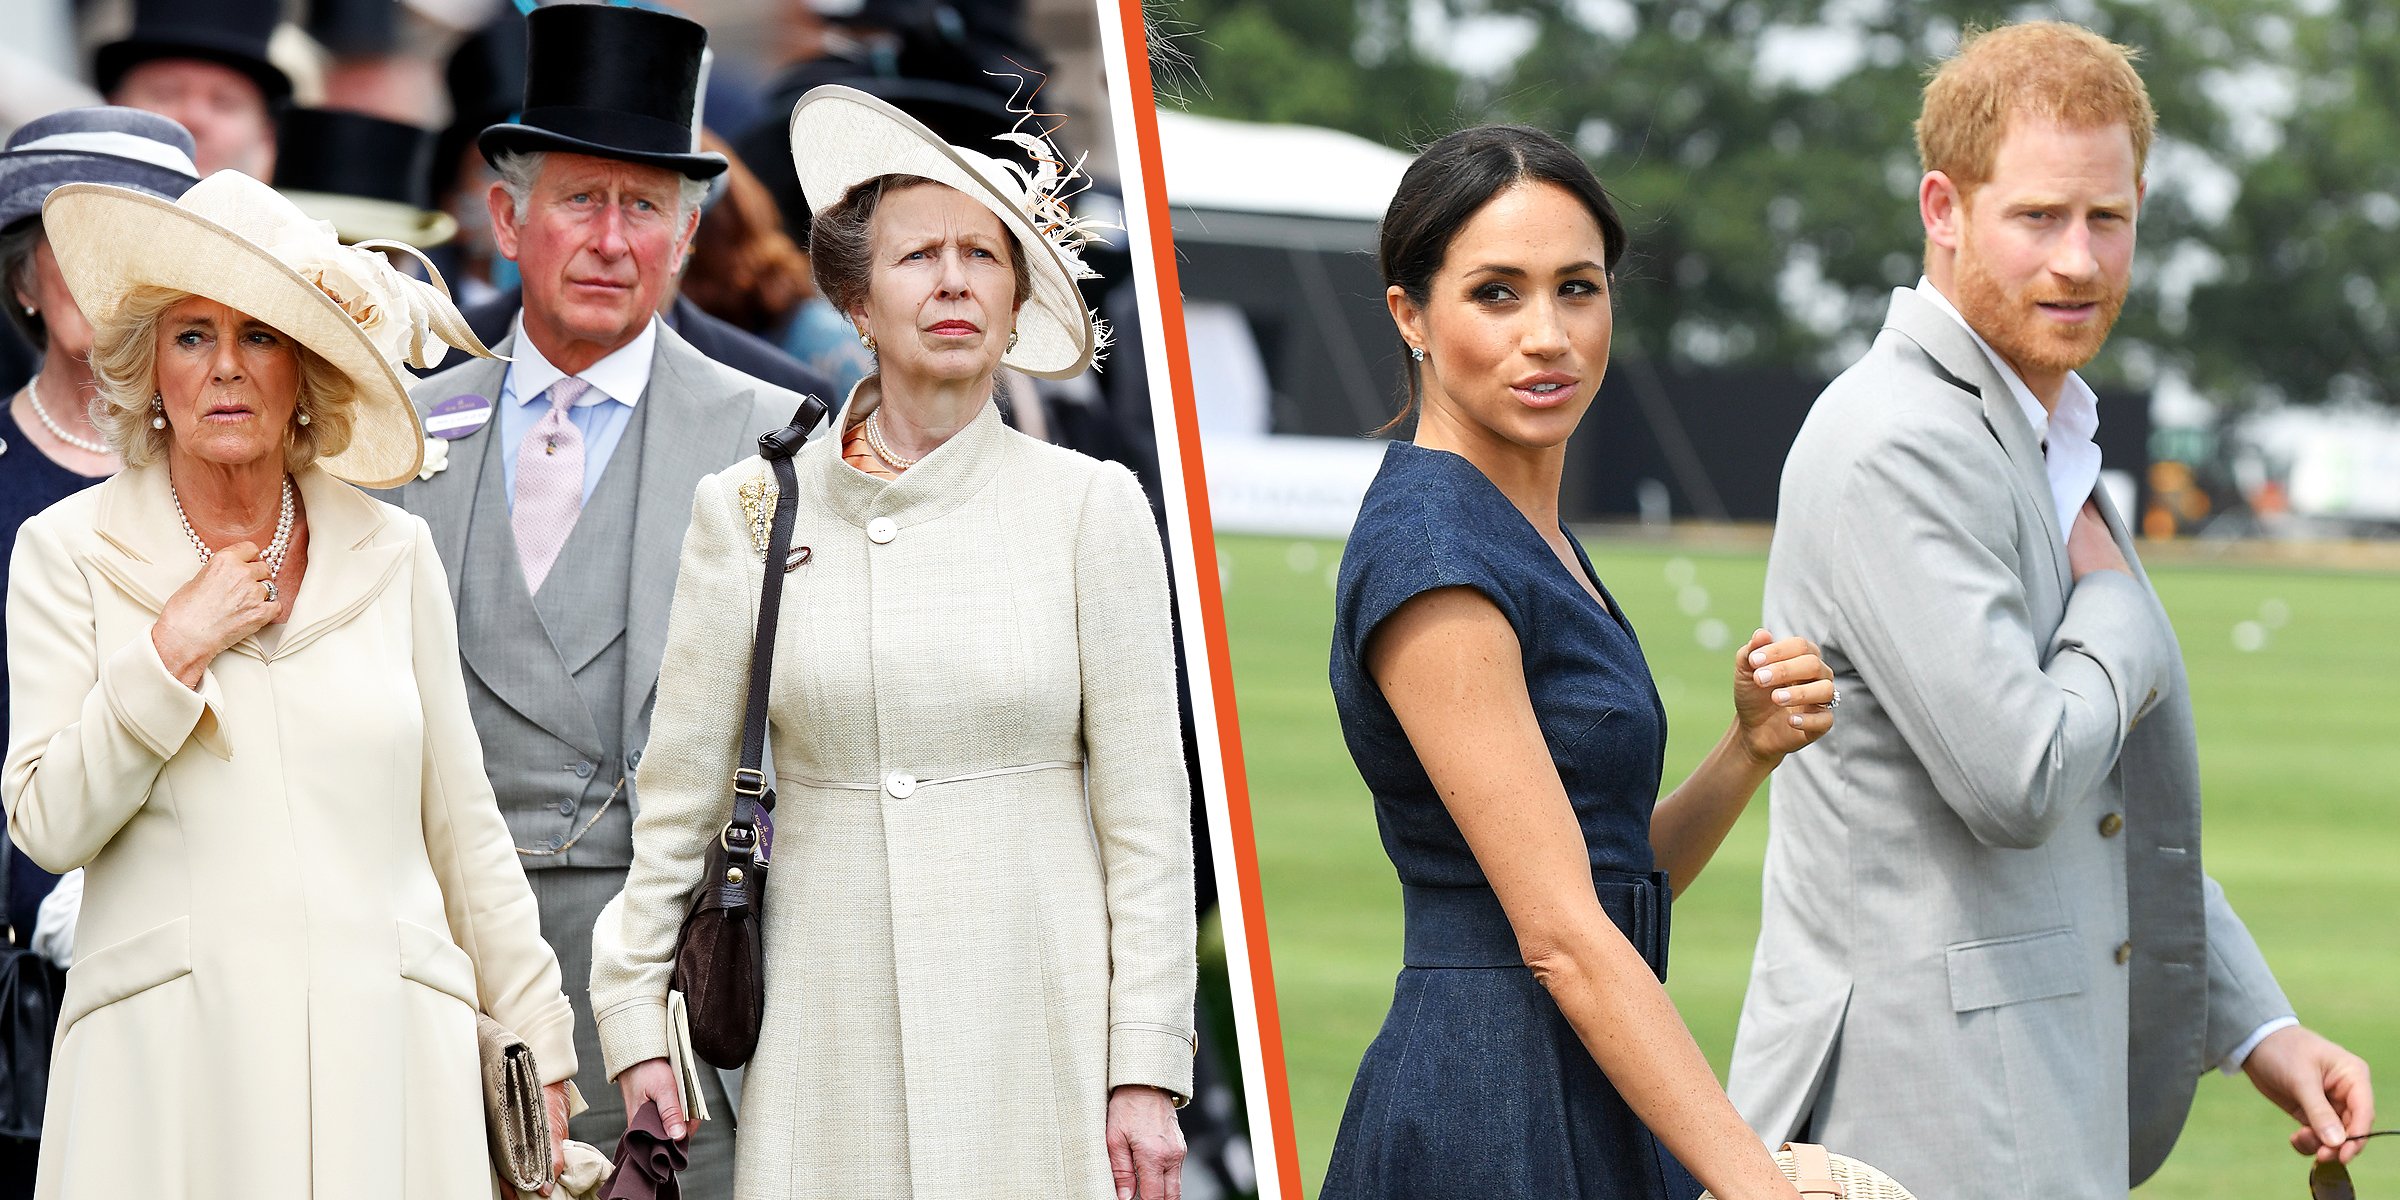 Camilla, Queen Consort, King Charles III and Princess Anne | Prince Harry and Meghan, Duchess of Sussex | Source: Getty Images